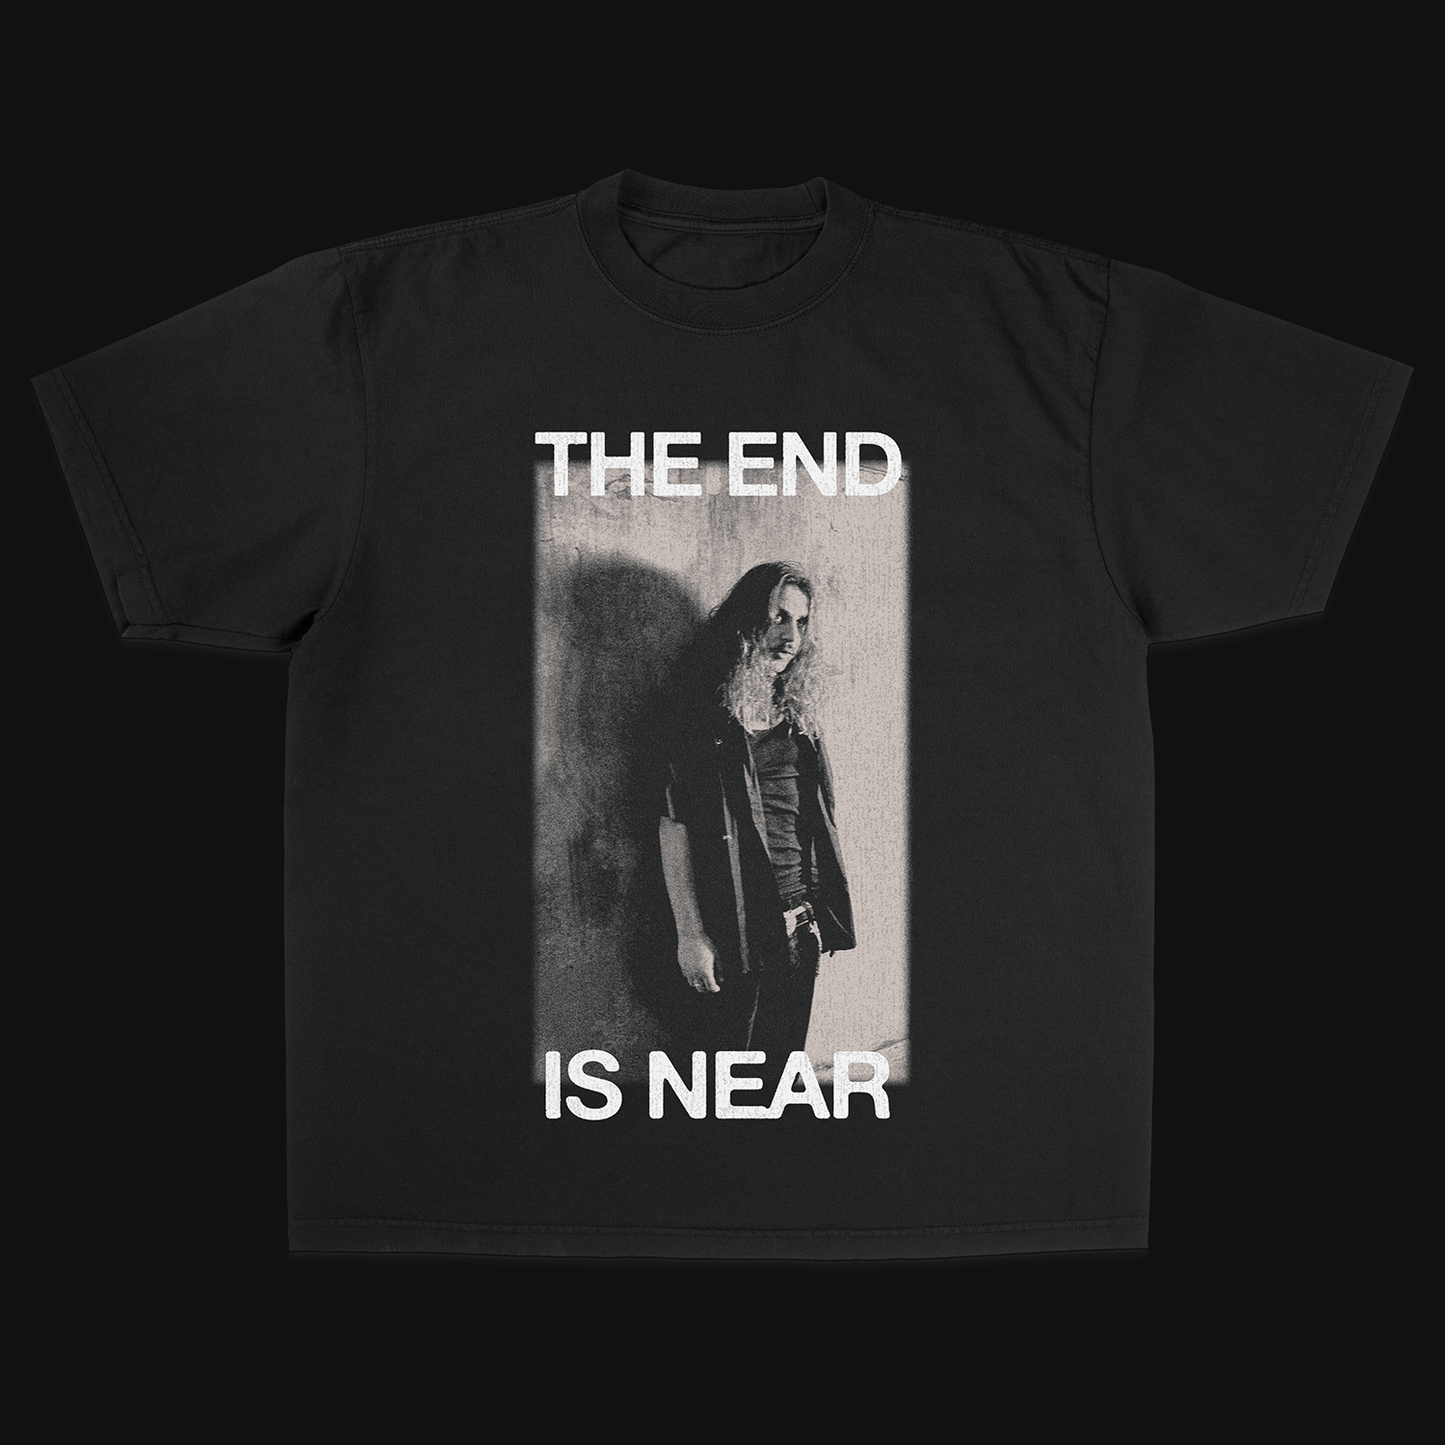 THE END IS NEAR Tee